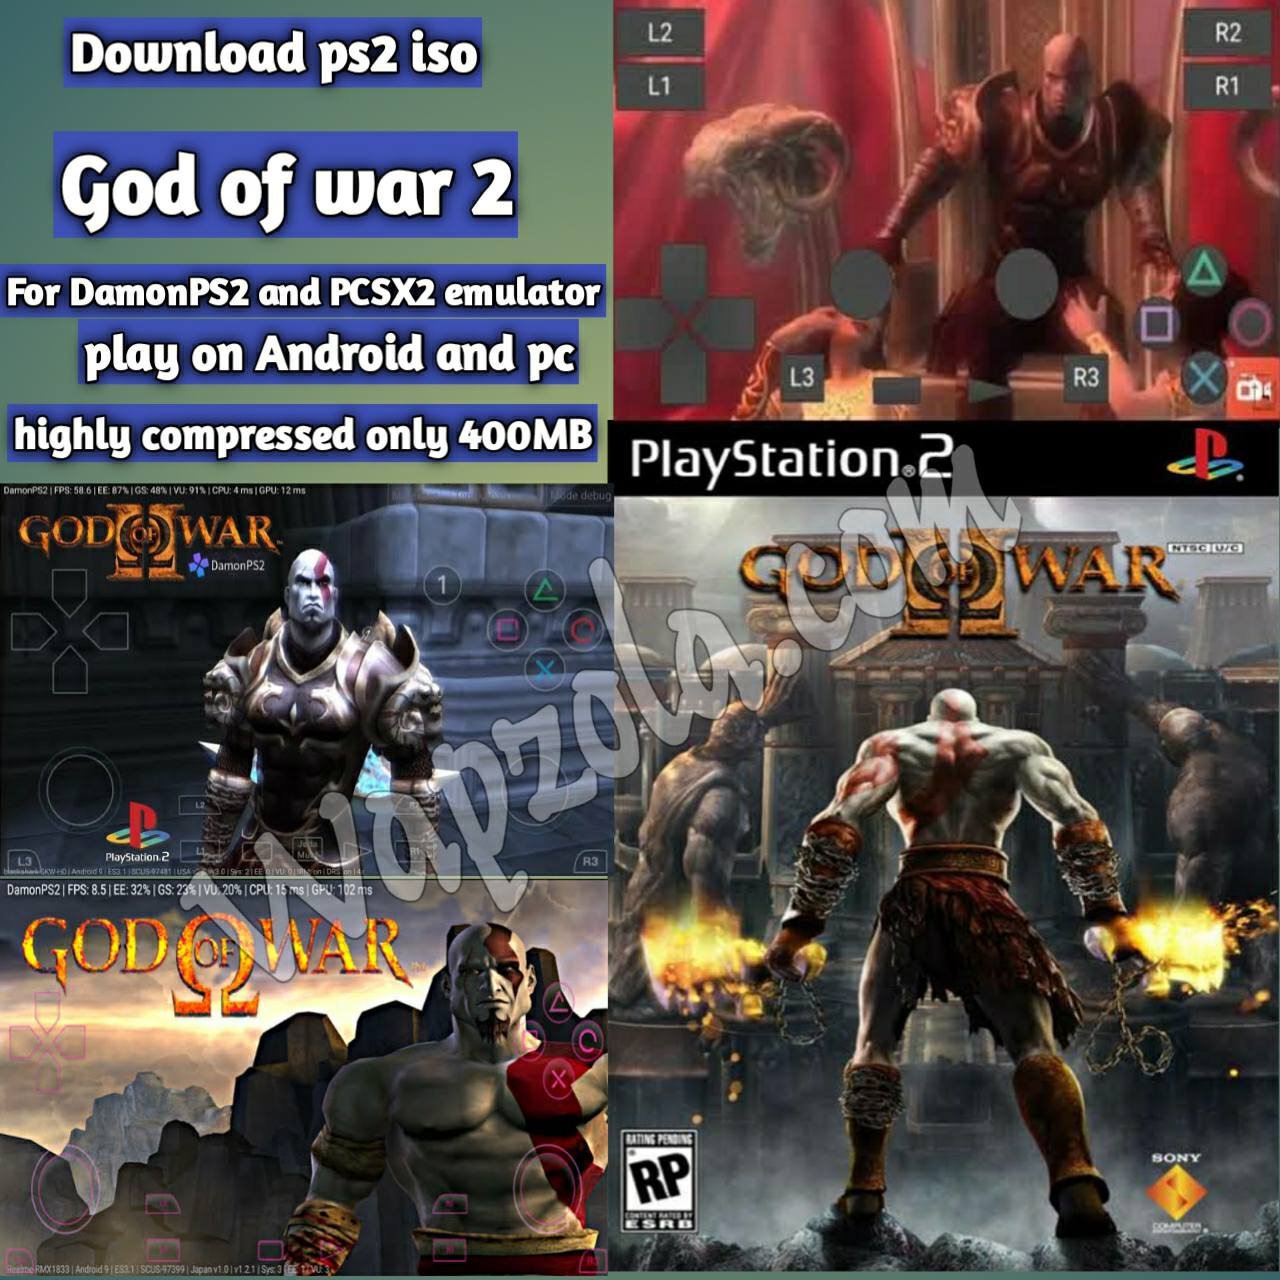 You are currently viewing [Download] God Of War 2 DamonPS2, AetherSX2, and PCSX2 emulator – PS2 APK ISO highly compressed play Android and pc